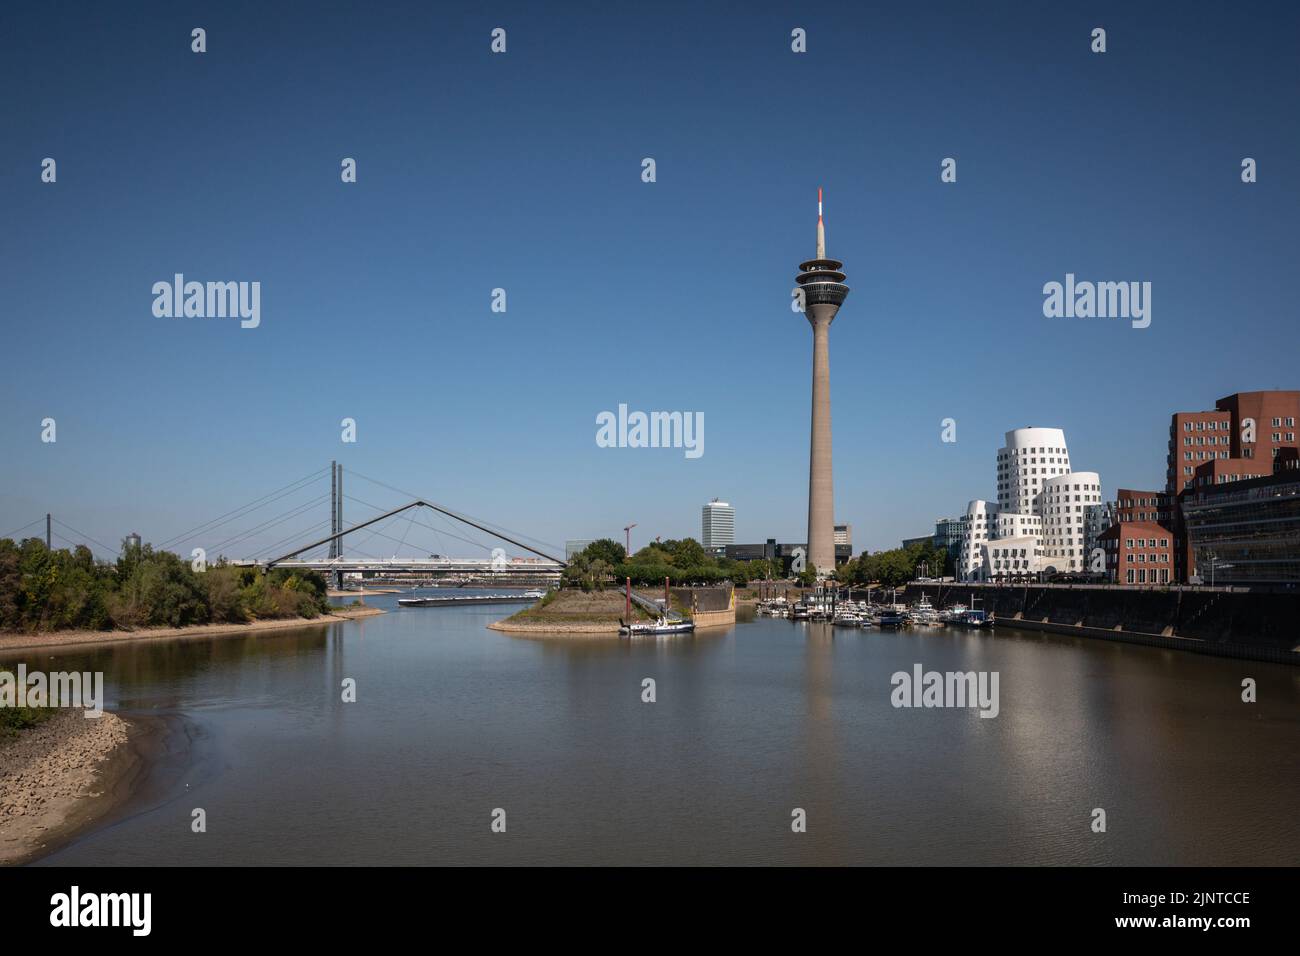 Düsseldorf, NRW, Germany, 13th Aug 2022. Temperatures again reached 32-35 degrees for the fourth consecutive day in the capital of NRW. The River Rhine, one of the busiest inland waterways in the world, has been strongly affected by the ongoing drought and resulting low water levels, caused by prolonged heat of up to 40 degrees and very little rain in the last few weeks. The shipping lane has narrowed down considerably, slowing down traffic, most vessels have also had to considerably reduce their freight weight, leading to supply issues and higher shipping prices. Stock Photo